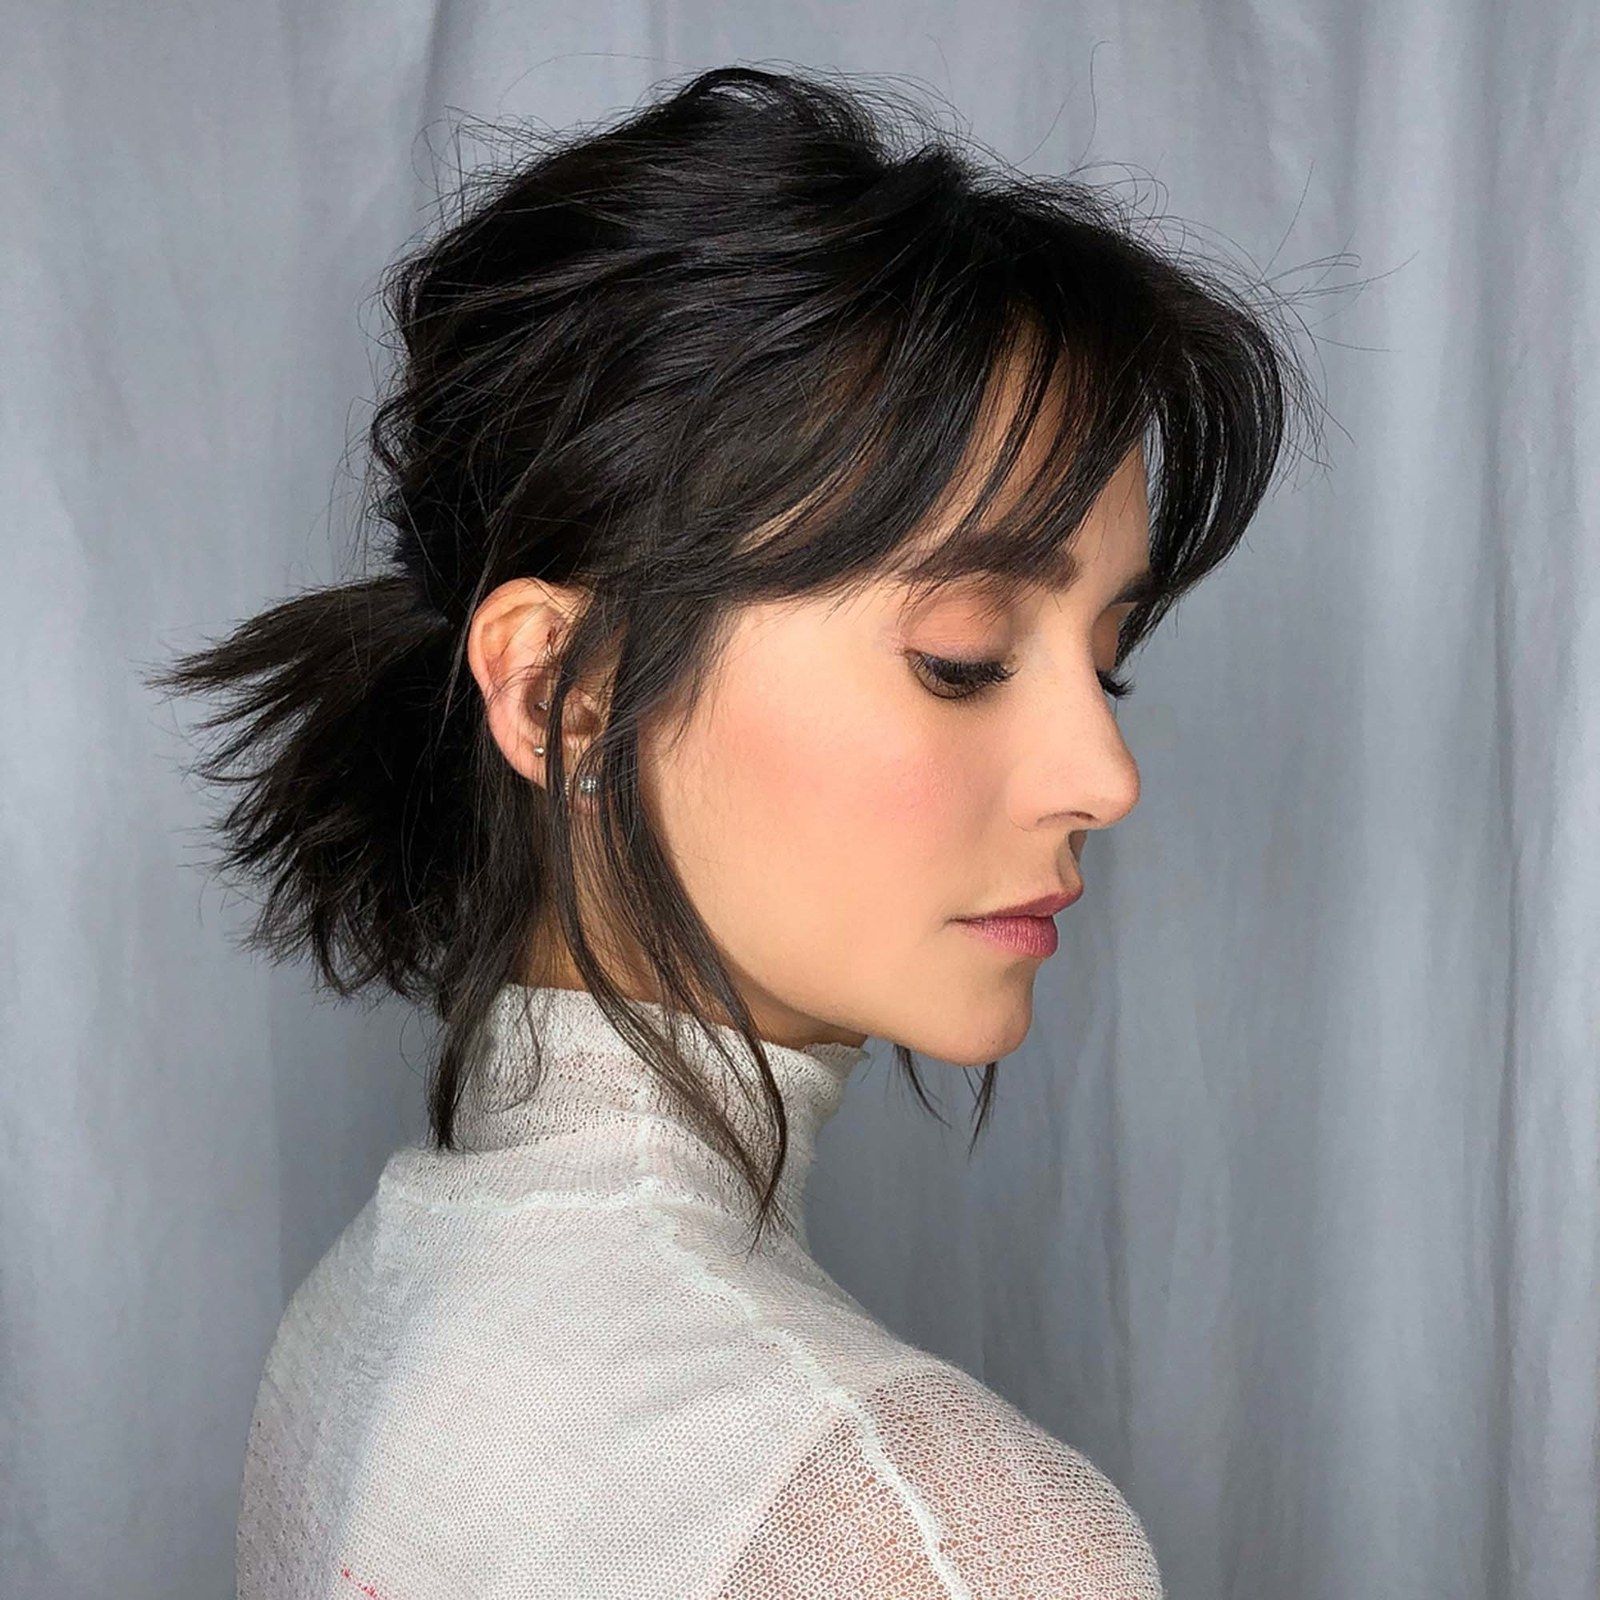 20 Short Hairstyle Ideas From The 2018 Red Carpets – Allure For Short Hairstyles With Bangs (View 8 of 25)